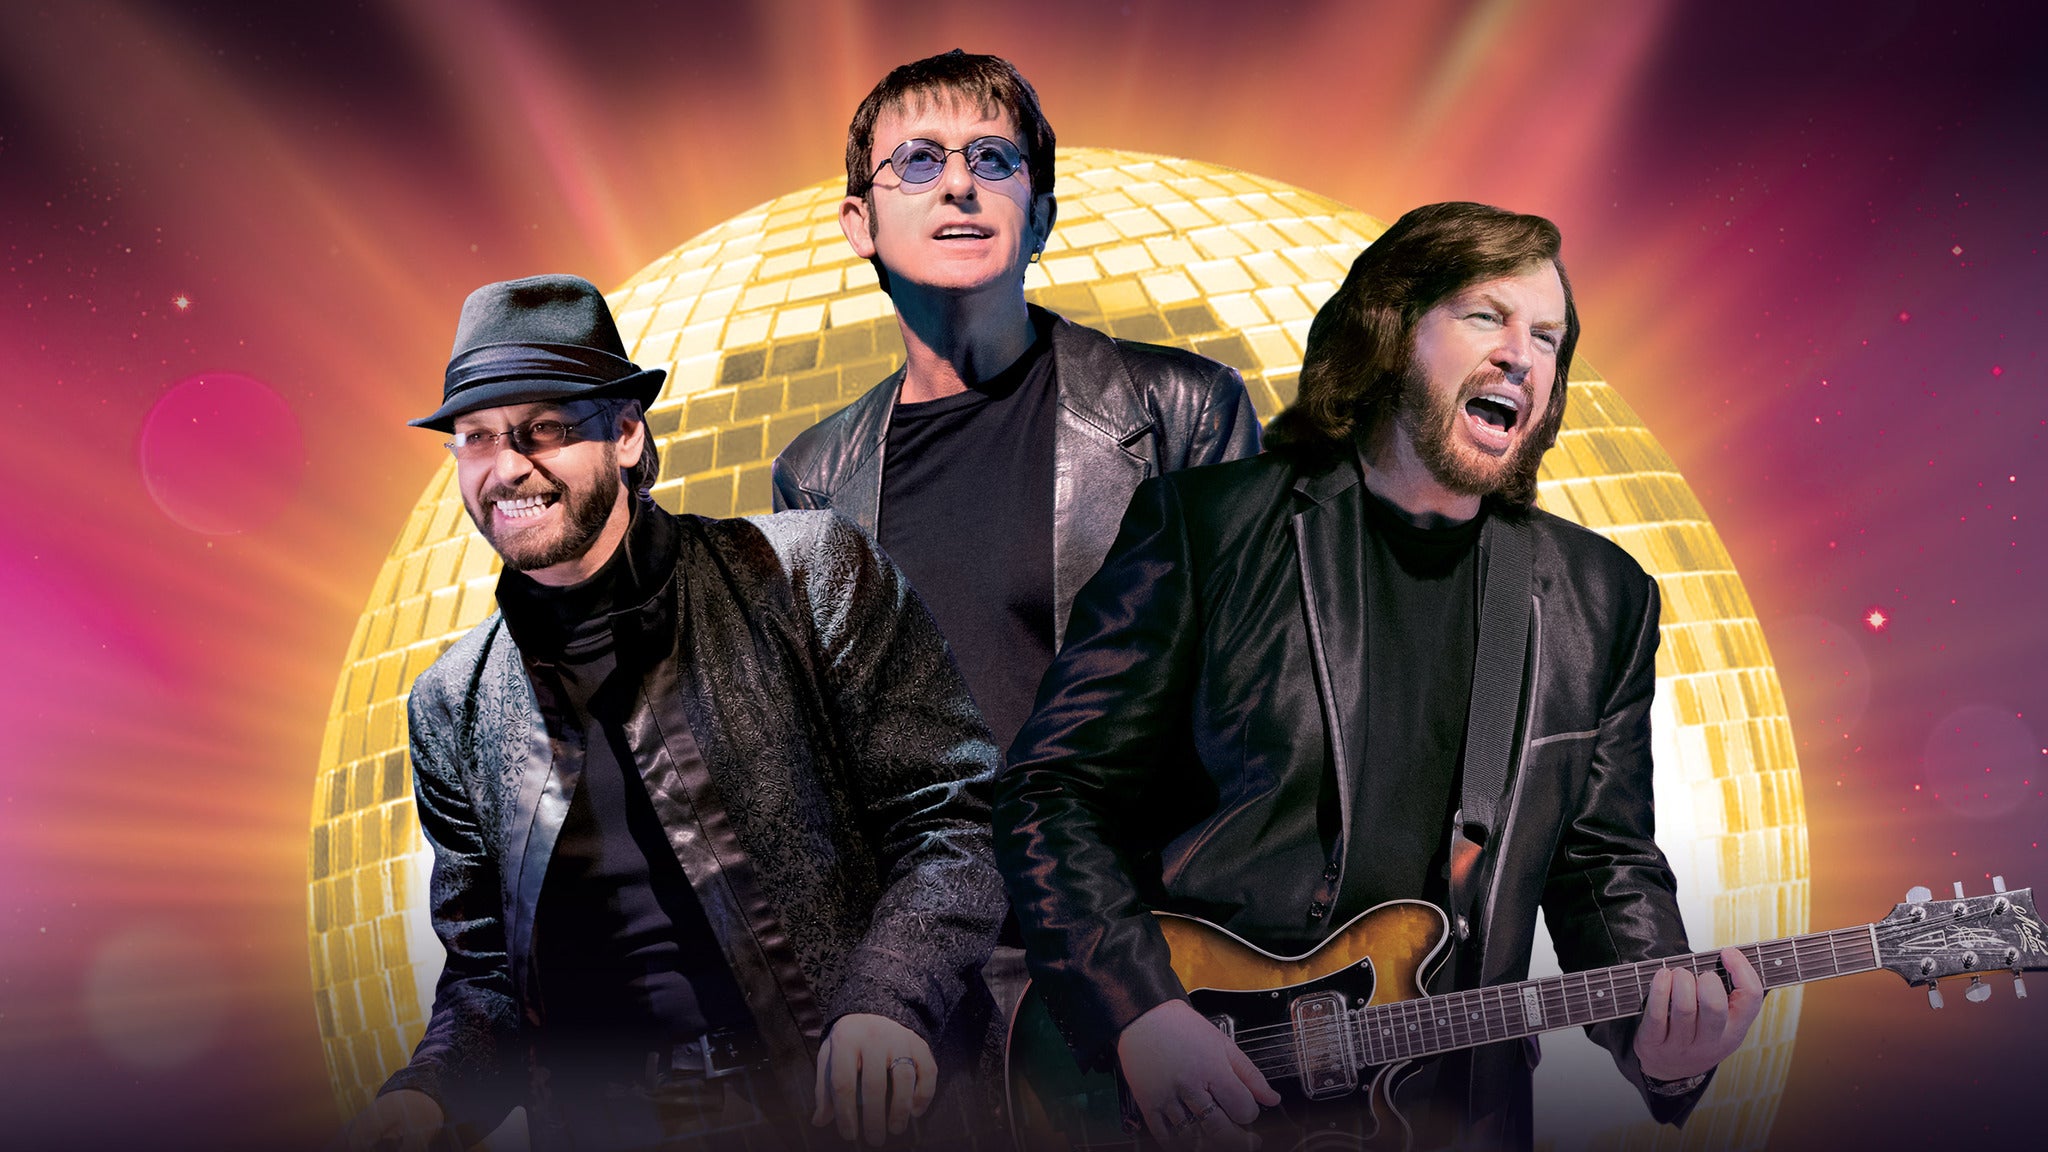 Image used with permission from Ticketmaster | The Australian Bee Gees tickets